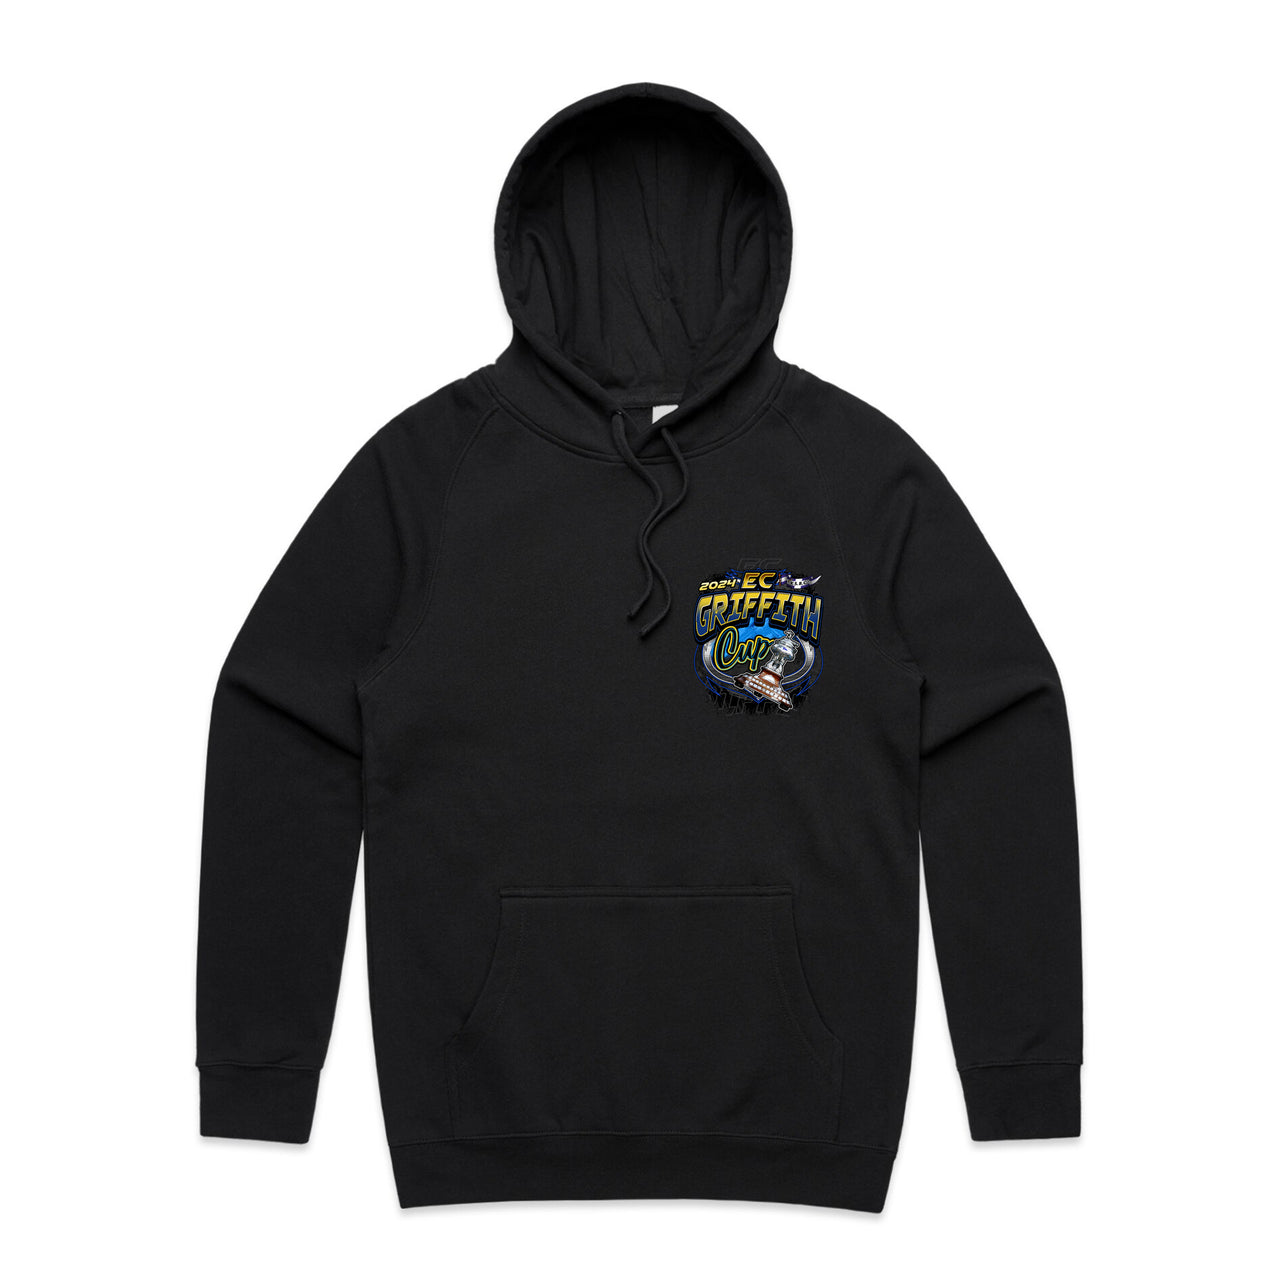 E.C Griffith Cup 2024 Event Mens Hoodie